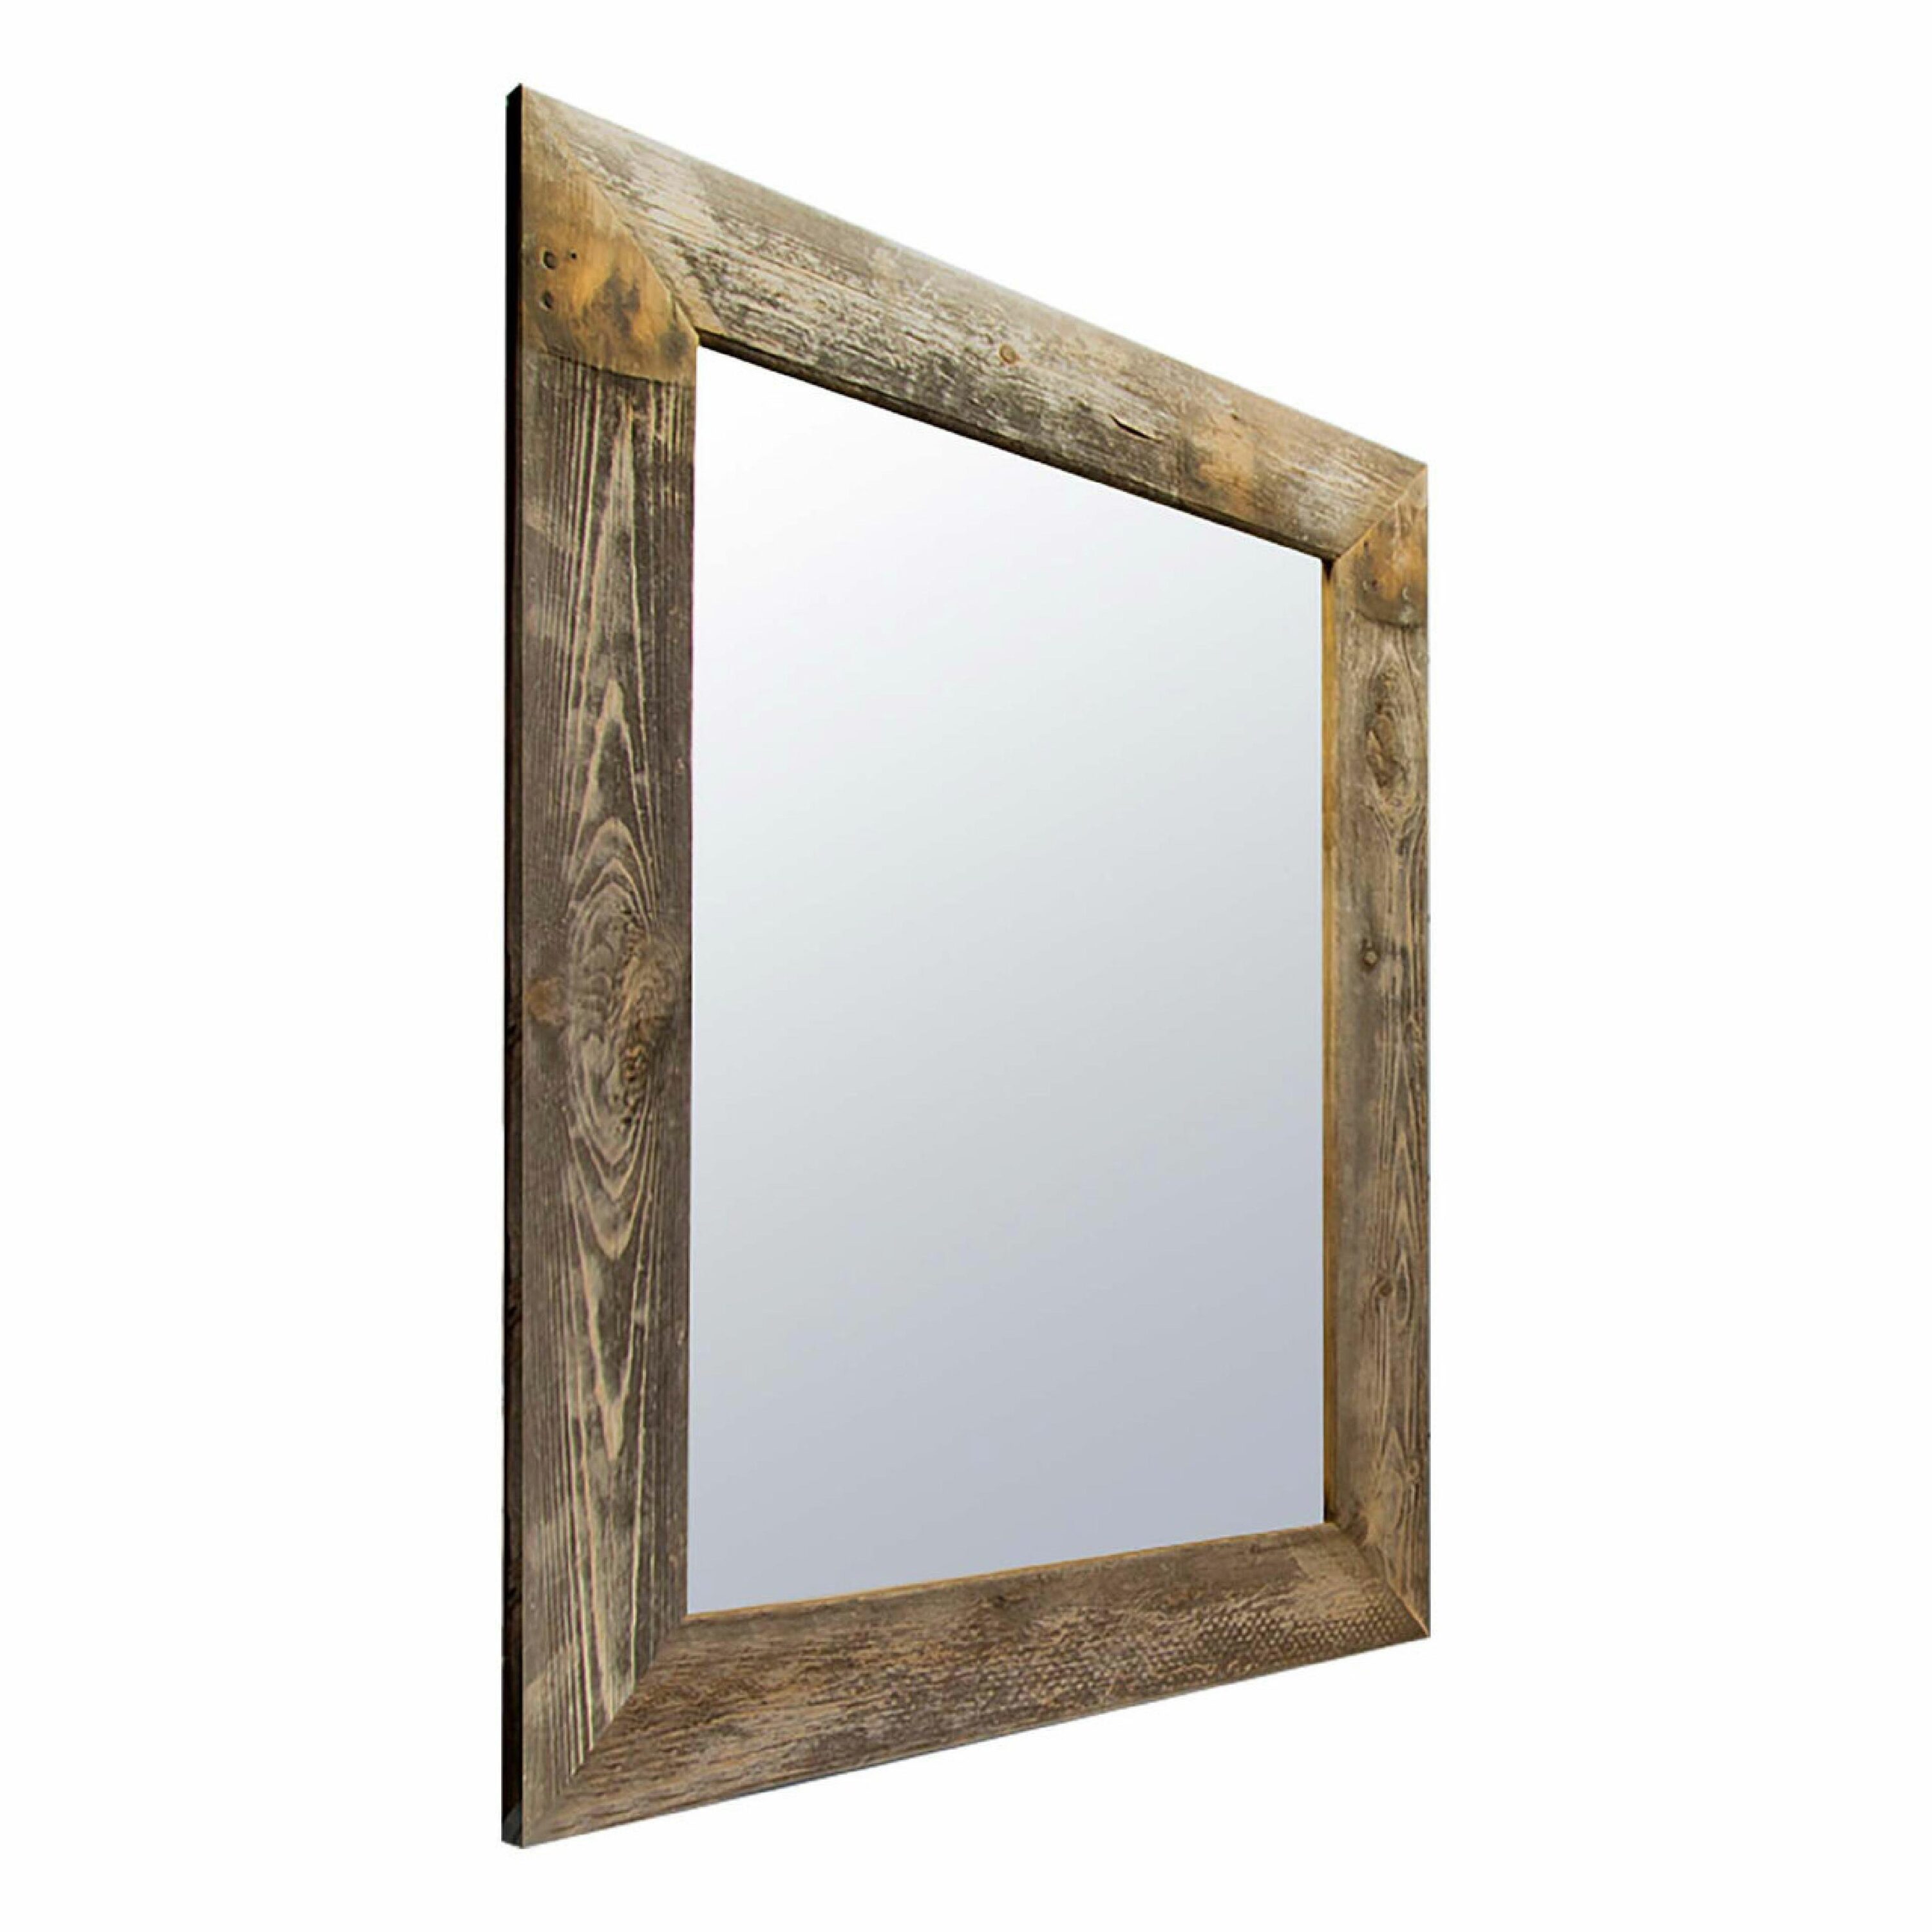 Natural Rustic Wood Framed Wall Mirror, Handmade in the USA